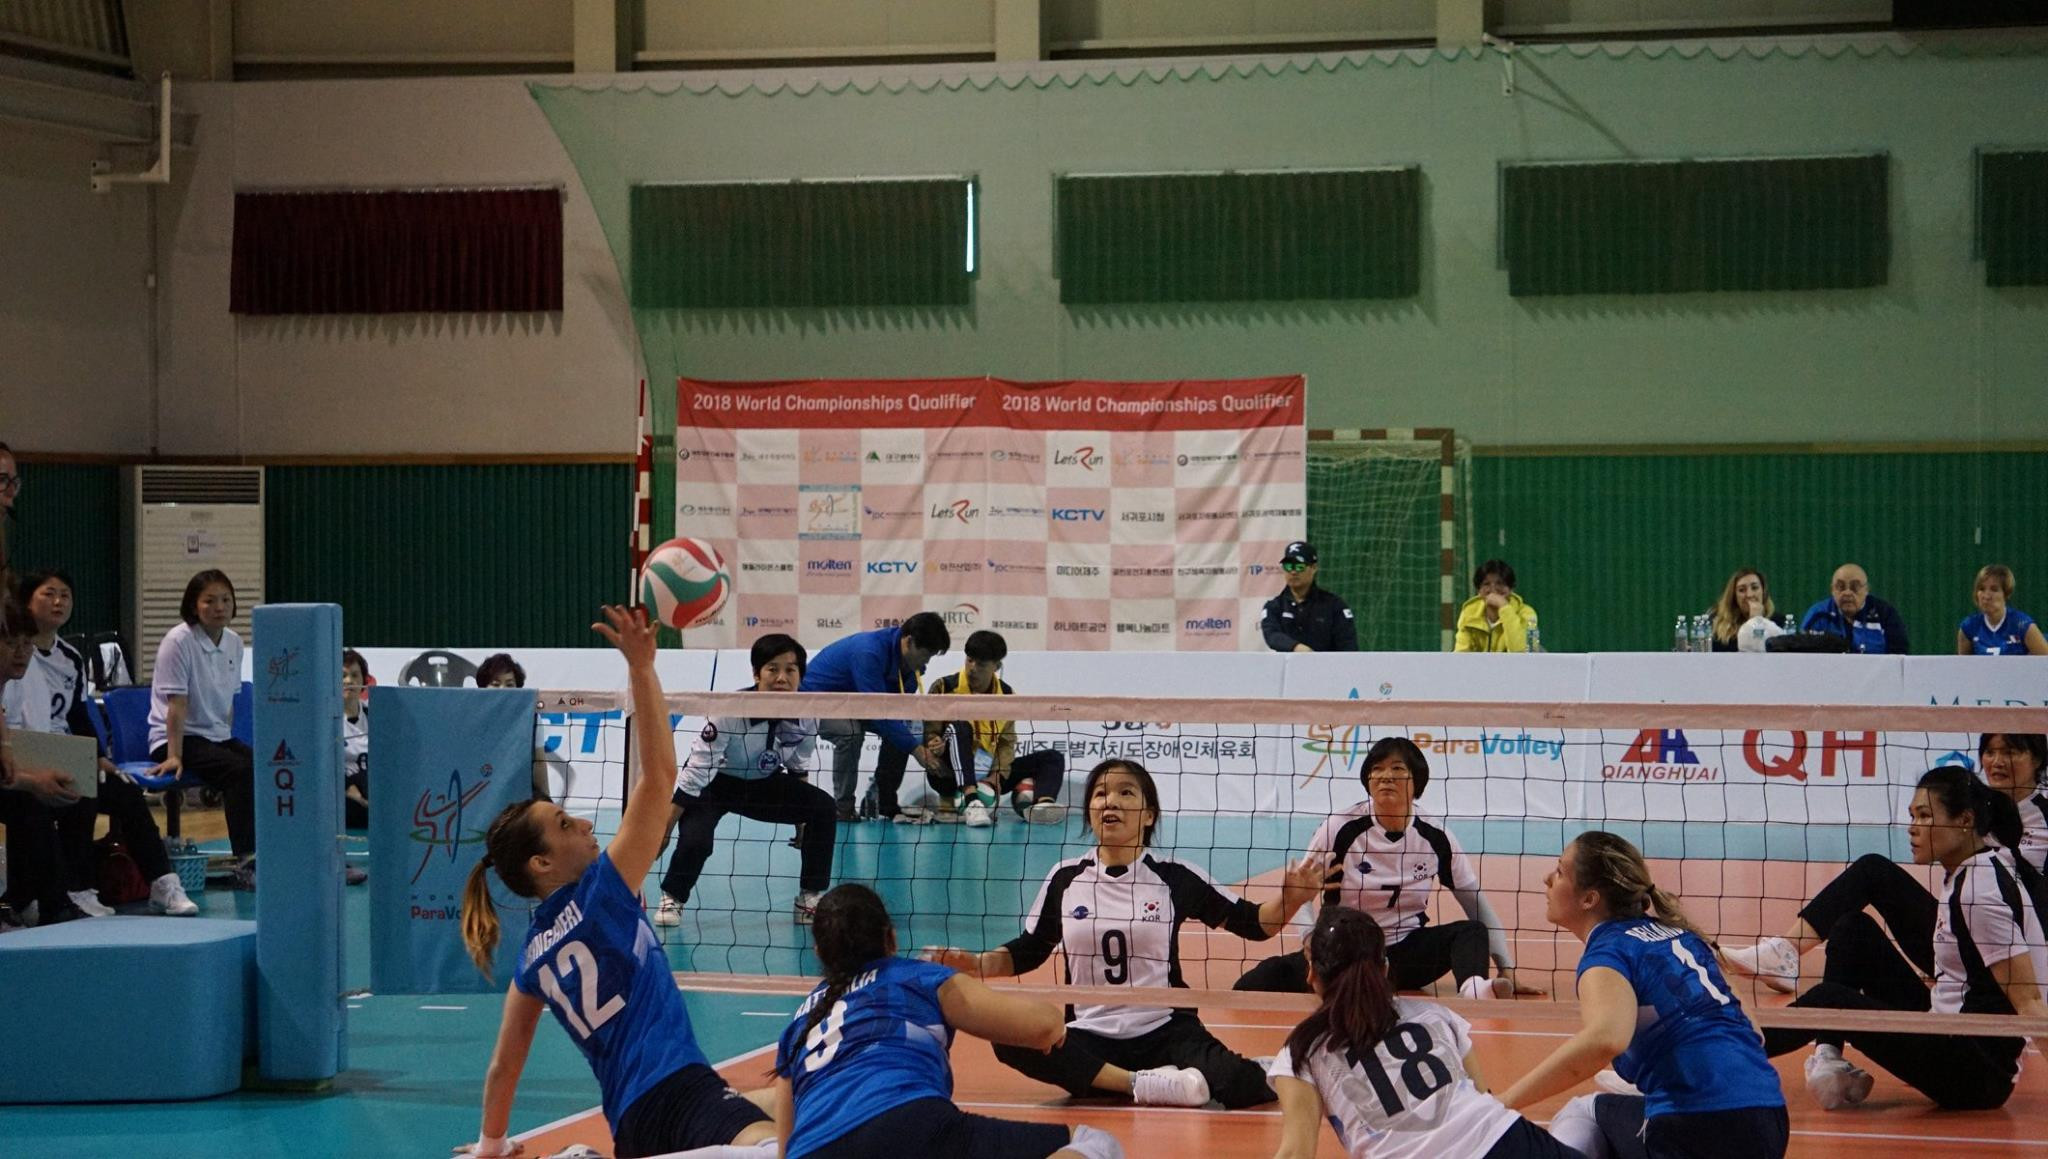 Italy's women qualify for 2018 Sitting Volleyball World Championships on disappointing day for South Korea 